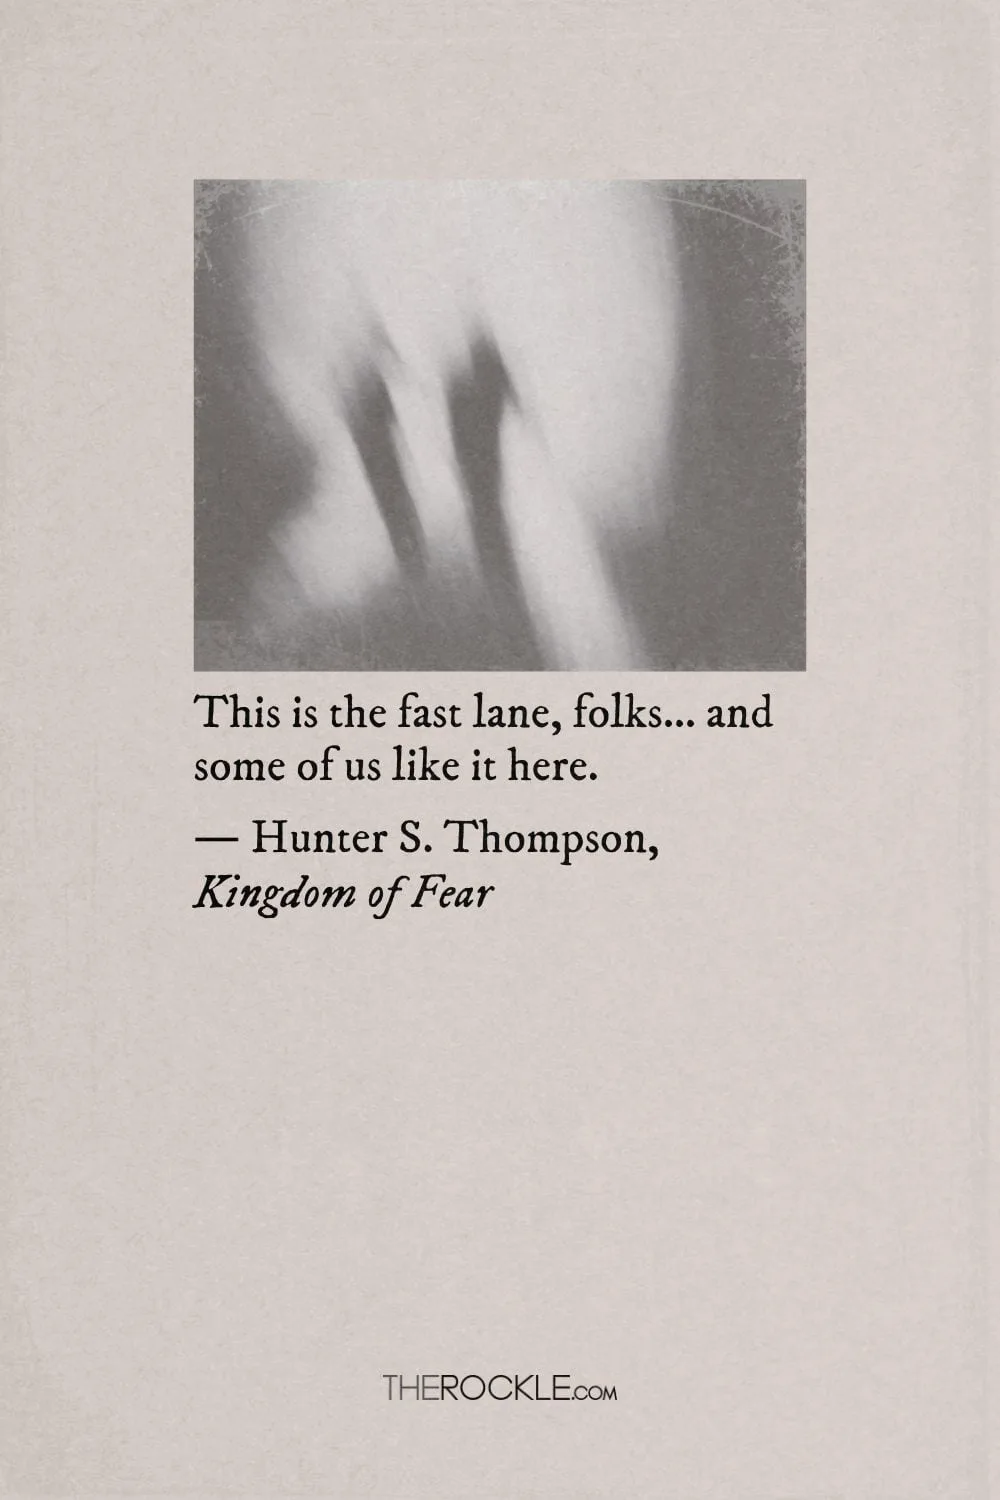 Thompson's quote on loving the life in the fast lane